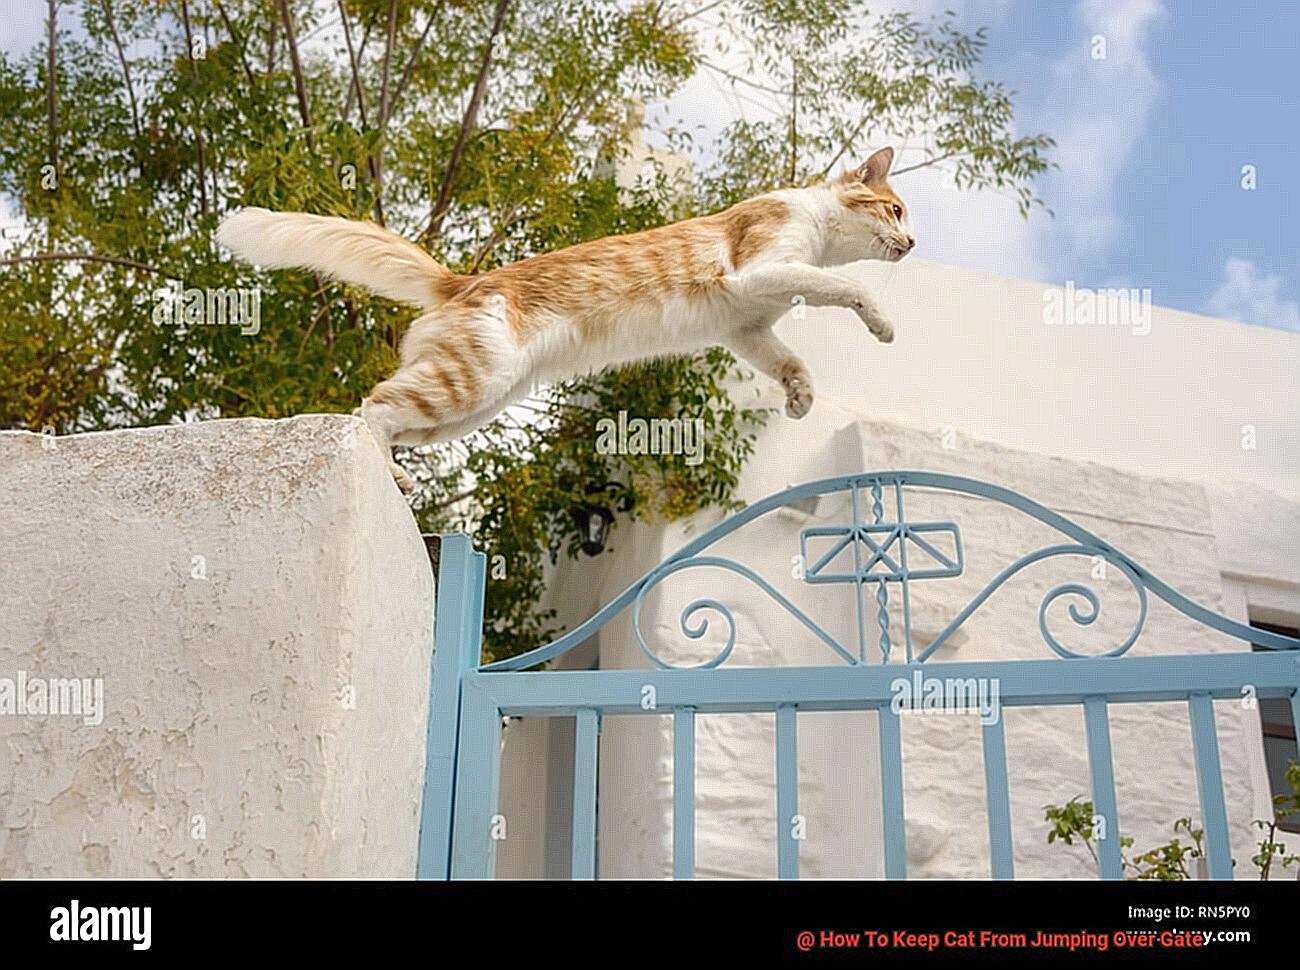 How To Keep Cat From Jumping Over Gate-3